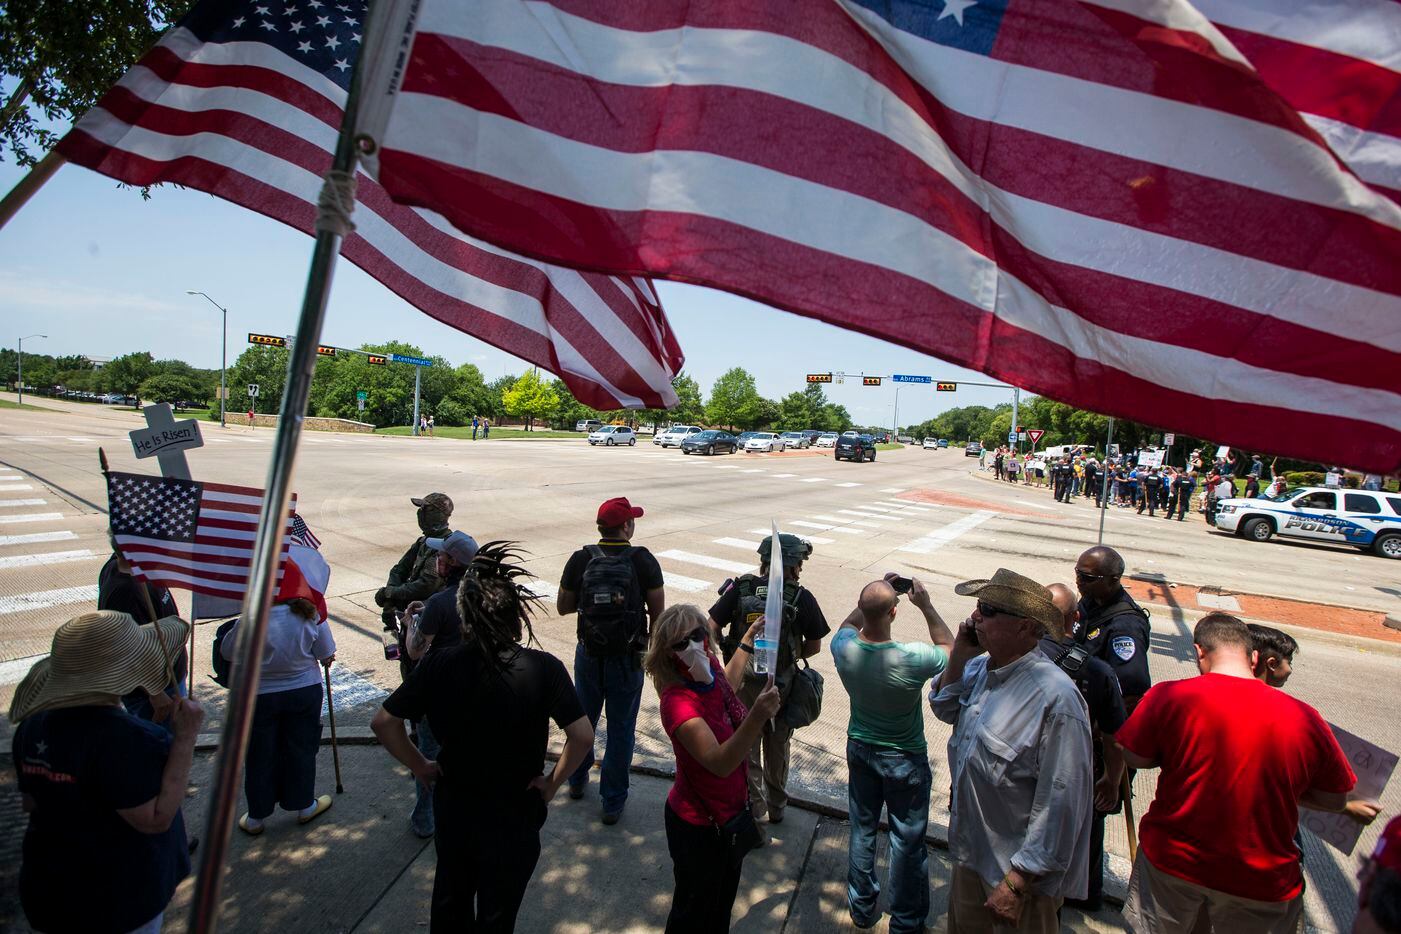 Anti-Shariah protesters stand at the intersection of Abrams Road and Centennial Boulevard during an anti-Shariah protest and counterprotest Saturday, June 10, 2017, in Richardson, Texas. (Ryan Michalesko/The Dallas Morning News)